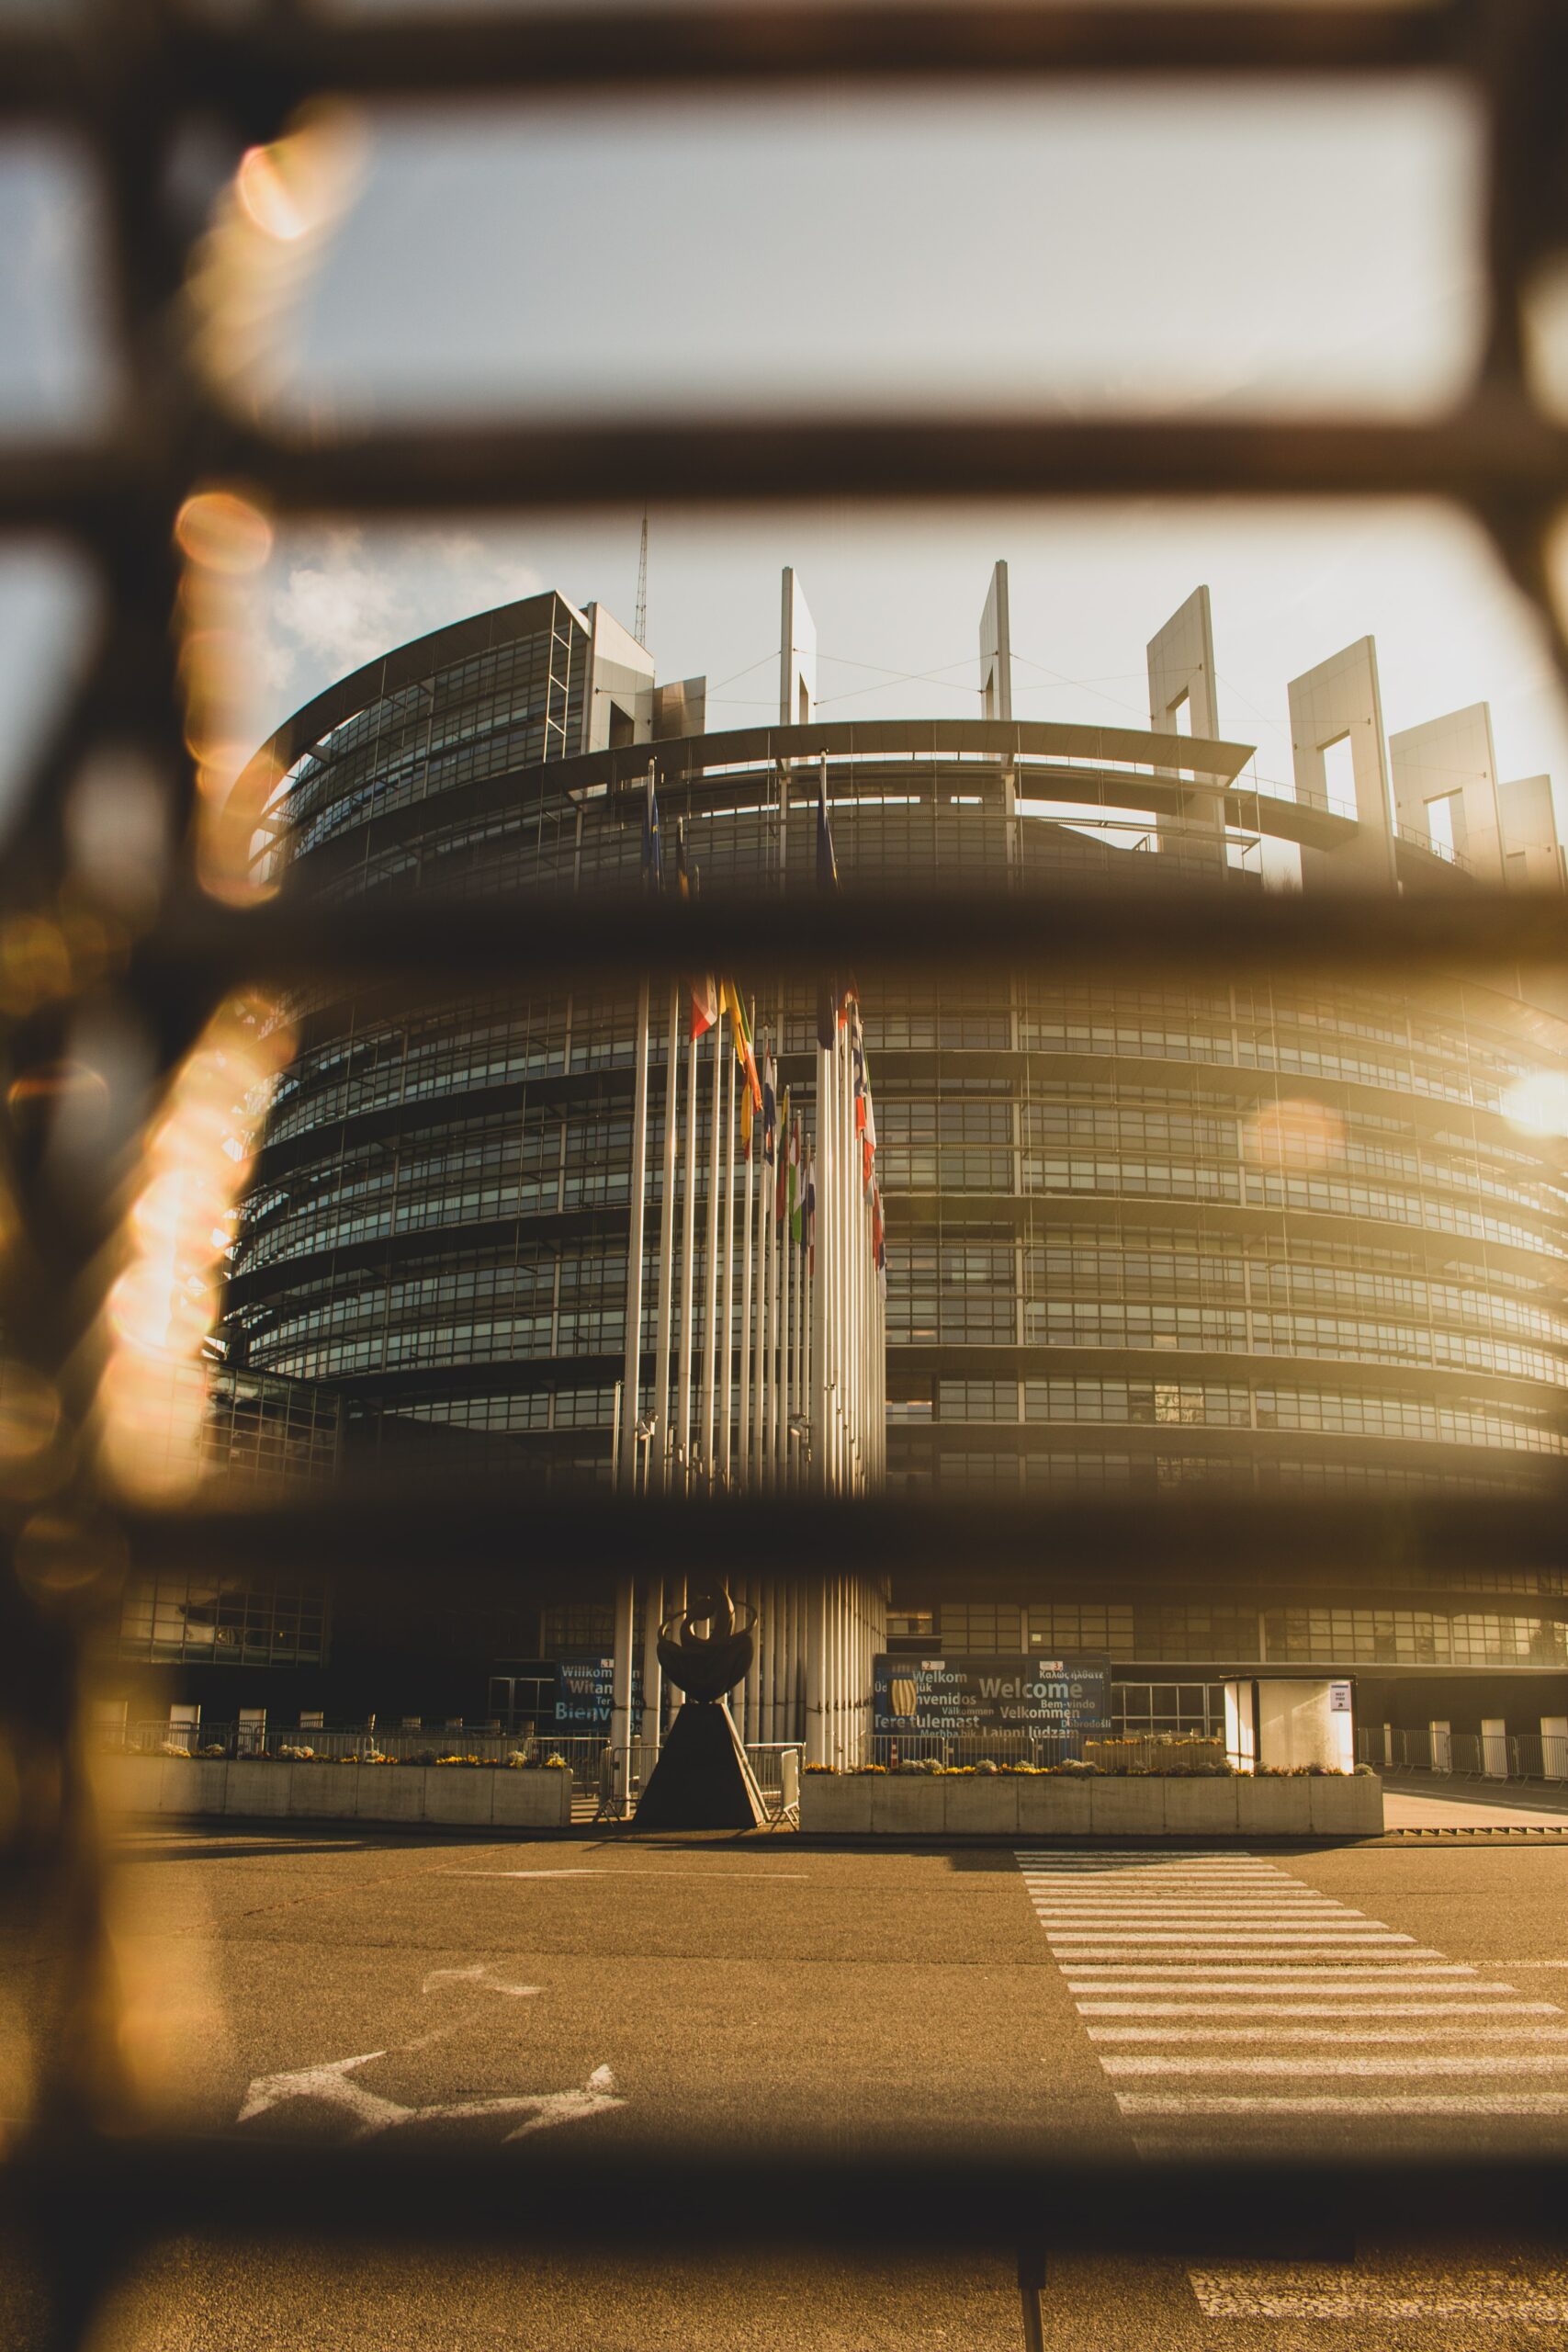 ESMA has launched a Common Supervisory Action (CSA) with National Competent Authorities (NCAs) on sustainability-related disclosures and the integration of sustainability risks